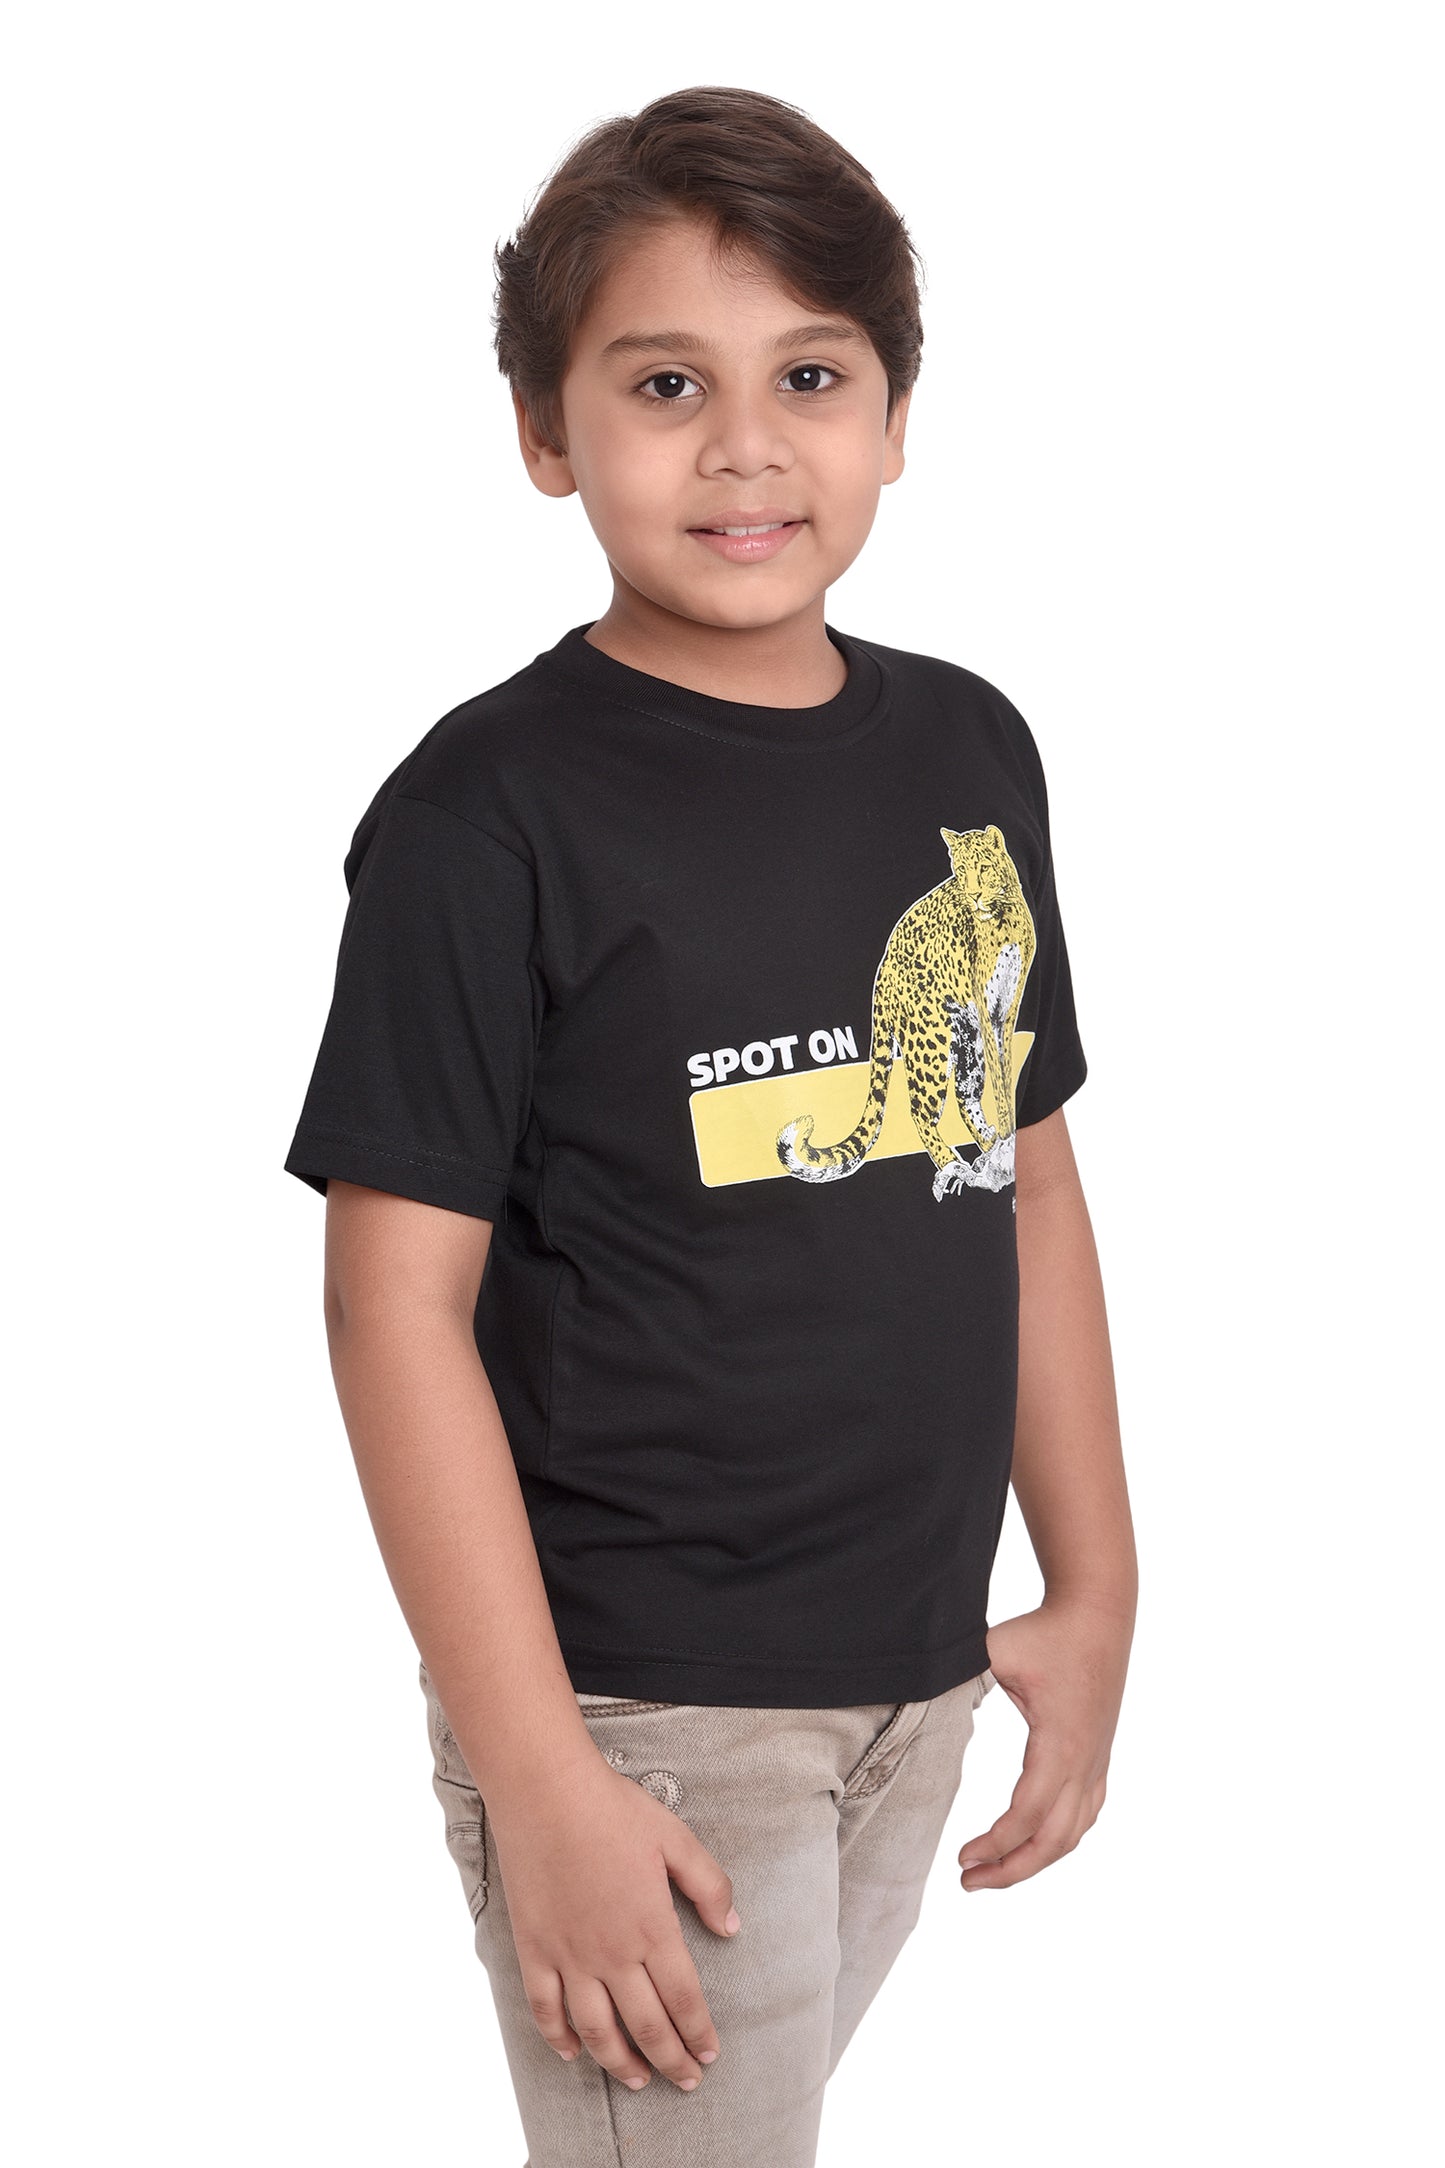 NEO GARMENTS Boys Cotton Round Neck Half sleeves T-Shirt - SPOT ON. | SIZE FROM 7YRS TO 14YRS